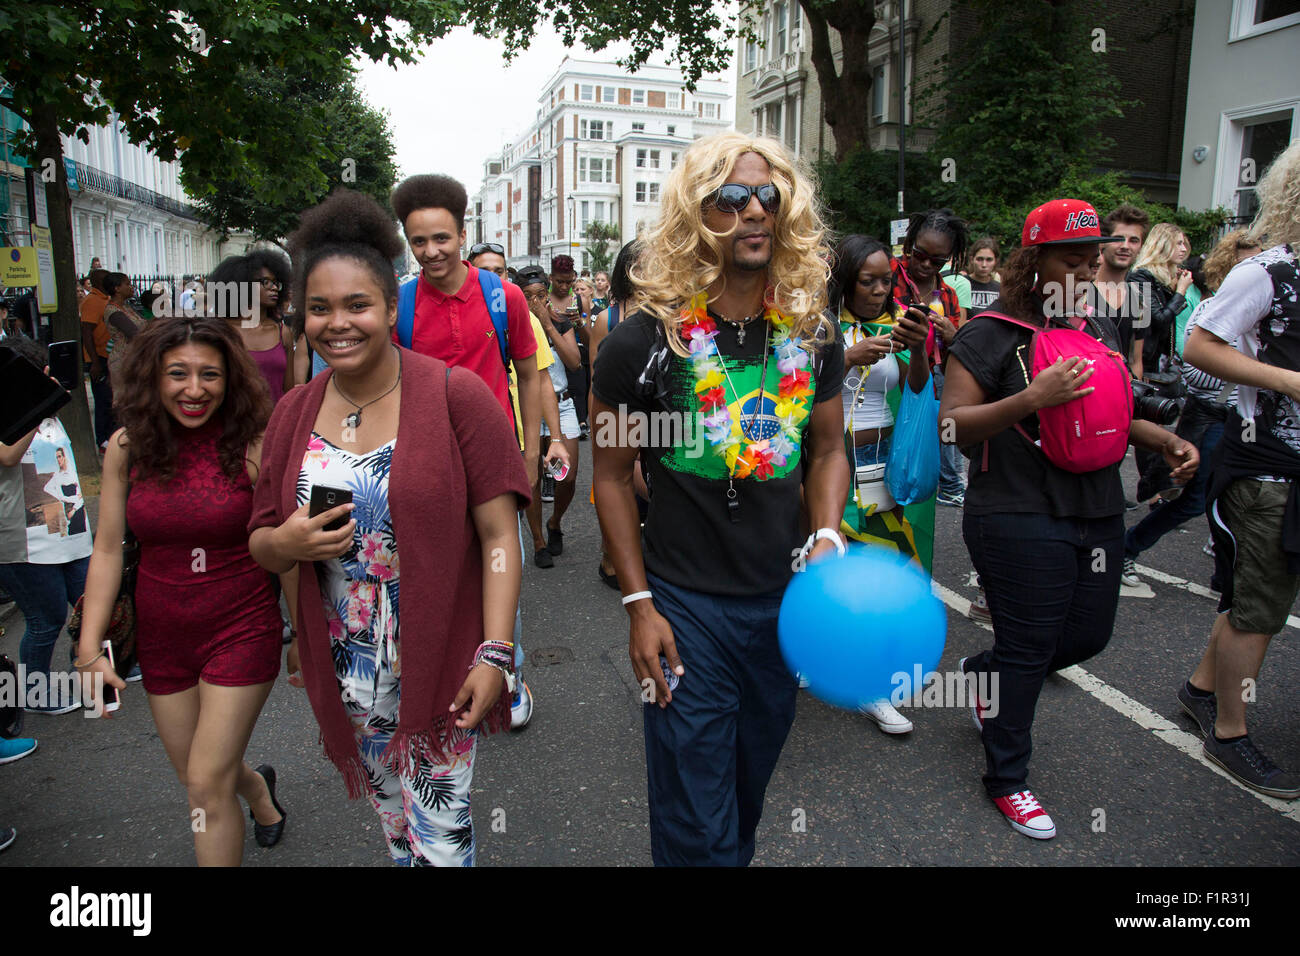 Man wearing a blonde wig. Notting Hill Carnival in West London. A celebration of West Indian / Caribbean culture and Europe's largest street party, festival and parade. Revellers come in their hundreds of thousands to have fun, dance, drink and let go in the brilliant atmosphere. It is led by members of the West Indian / Caribbrean community, particularly the Trinidadian and Tobagonian British population, many of whom have lived in the area since the 1950s. The carnival has attracted up to 2 million people in the past and centres around a parade of floats, dancers and sound systems. Stock Photo